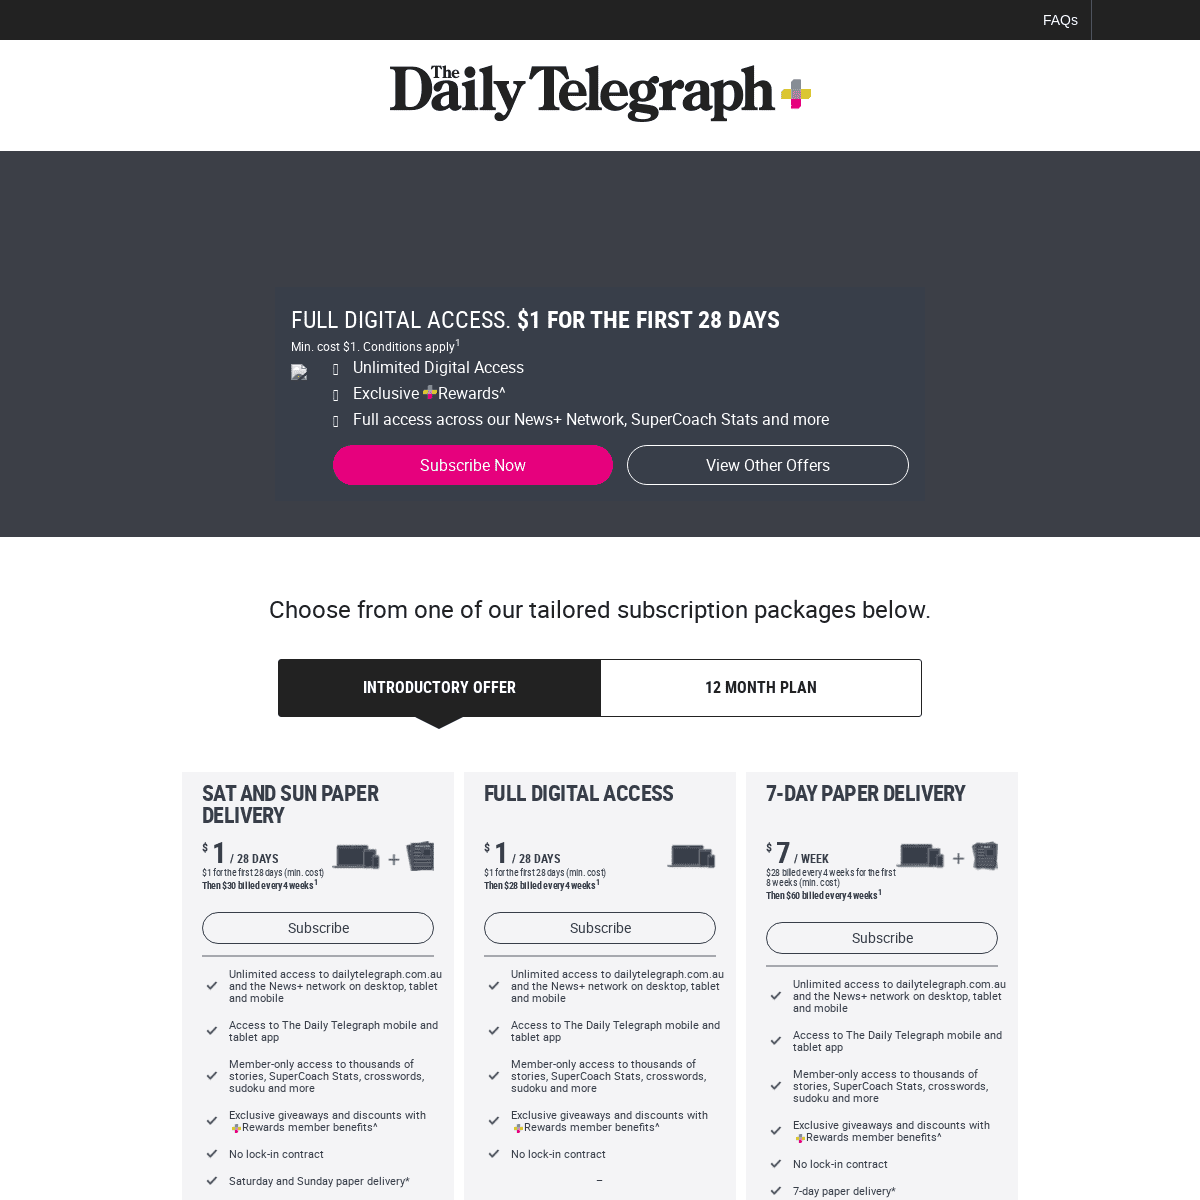 A complete backup of www.dailytelegraph.com.au/news/nsw/anthony-sampieri-sentenced-to-life-in-prison-over-child-rape/news-story/